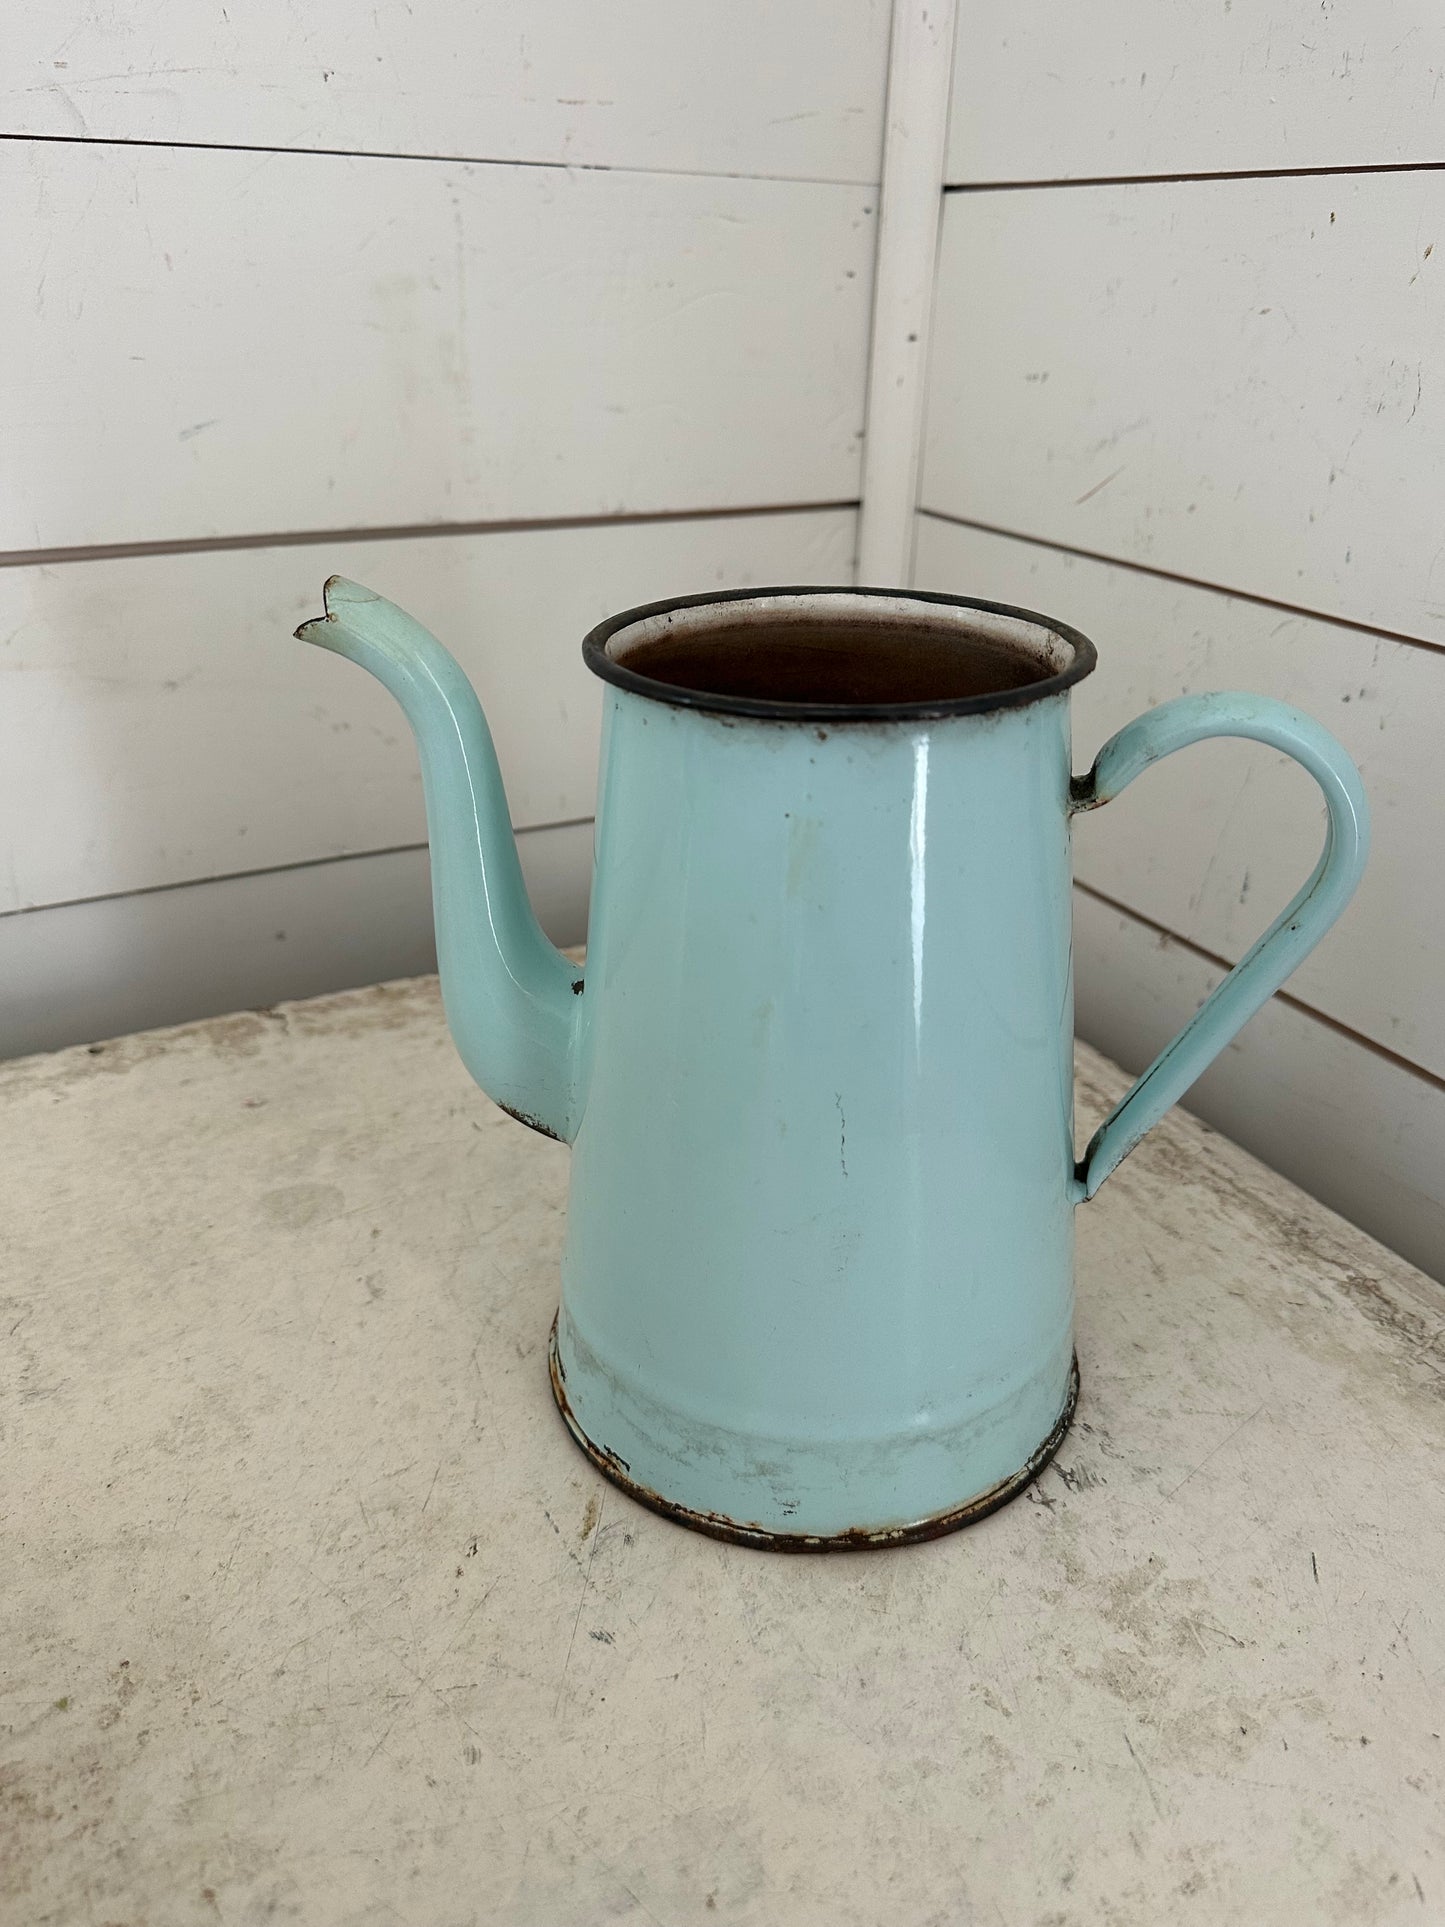 Antique French Enamel Coffee Mint  no lid